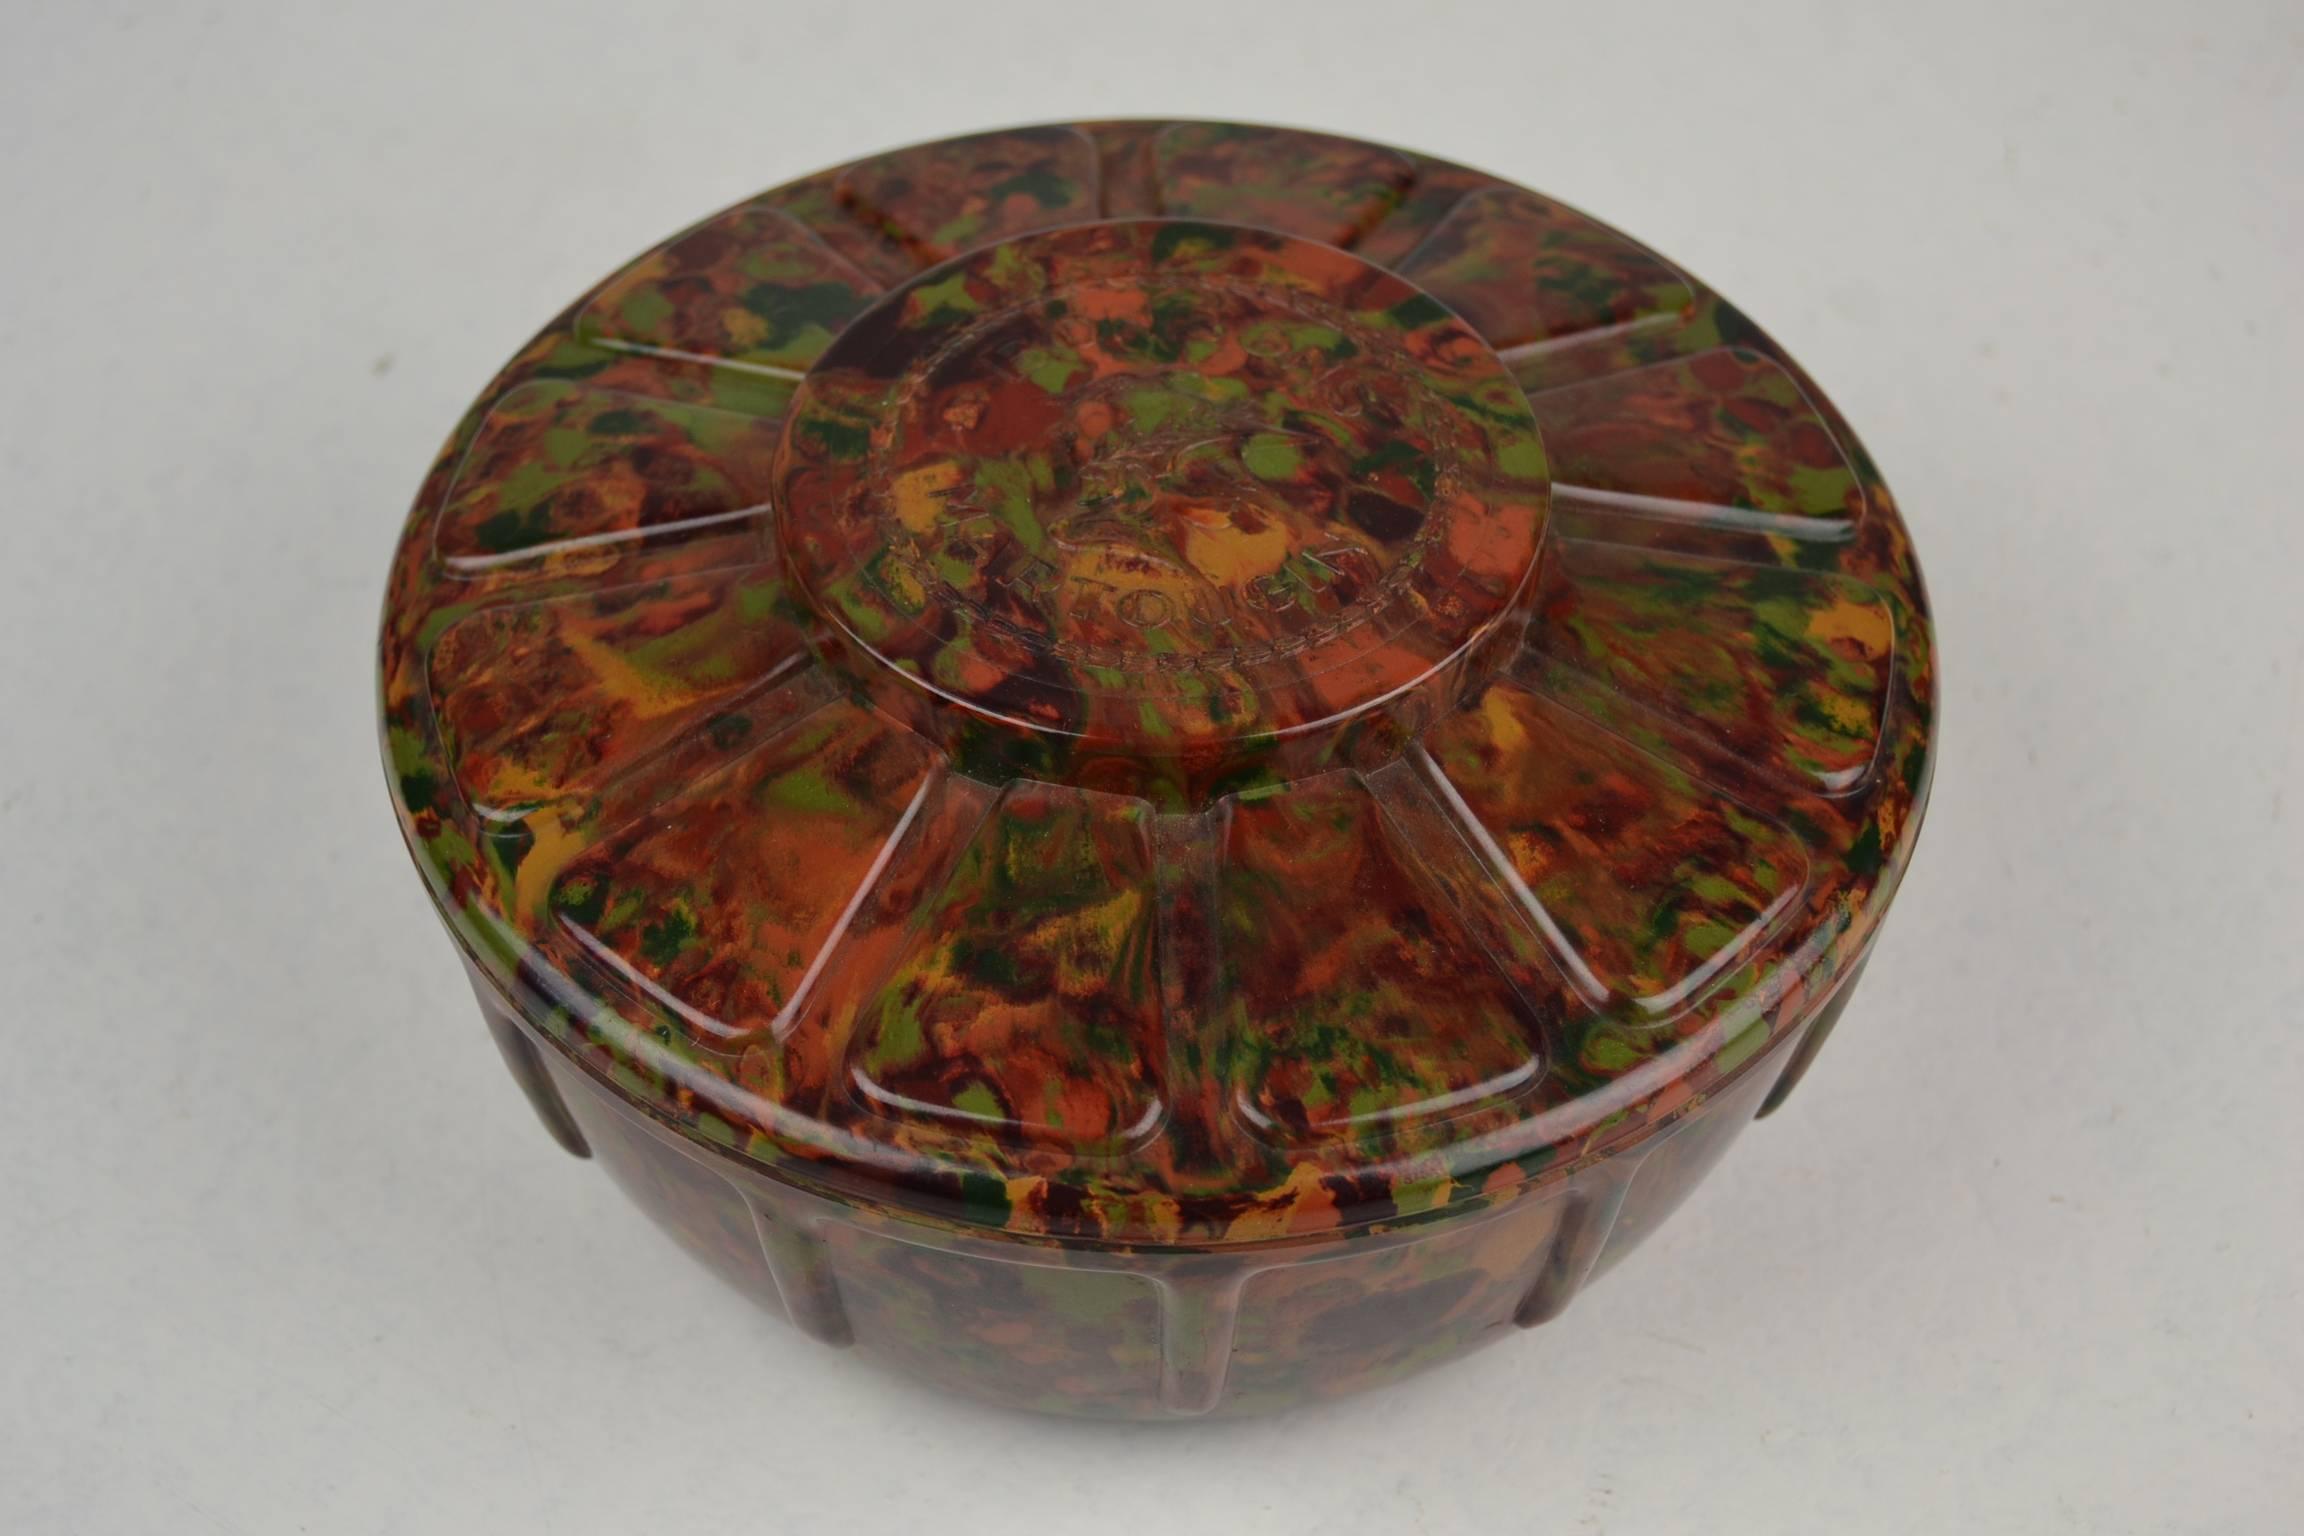 Stylish  Art Deco Bakelite Bonbon Box for the Belgian Chocolate Brand Martougin. 
This Storage Box for Chocolate dates from the 1920s and is made in the beautiful Autumn Colors red, brown, green, orange and yellow with a Flamed Pattern. On the lid